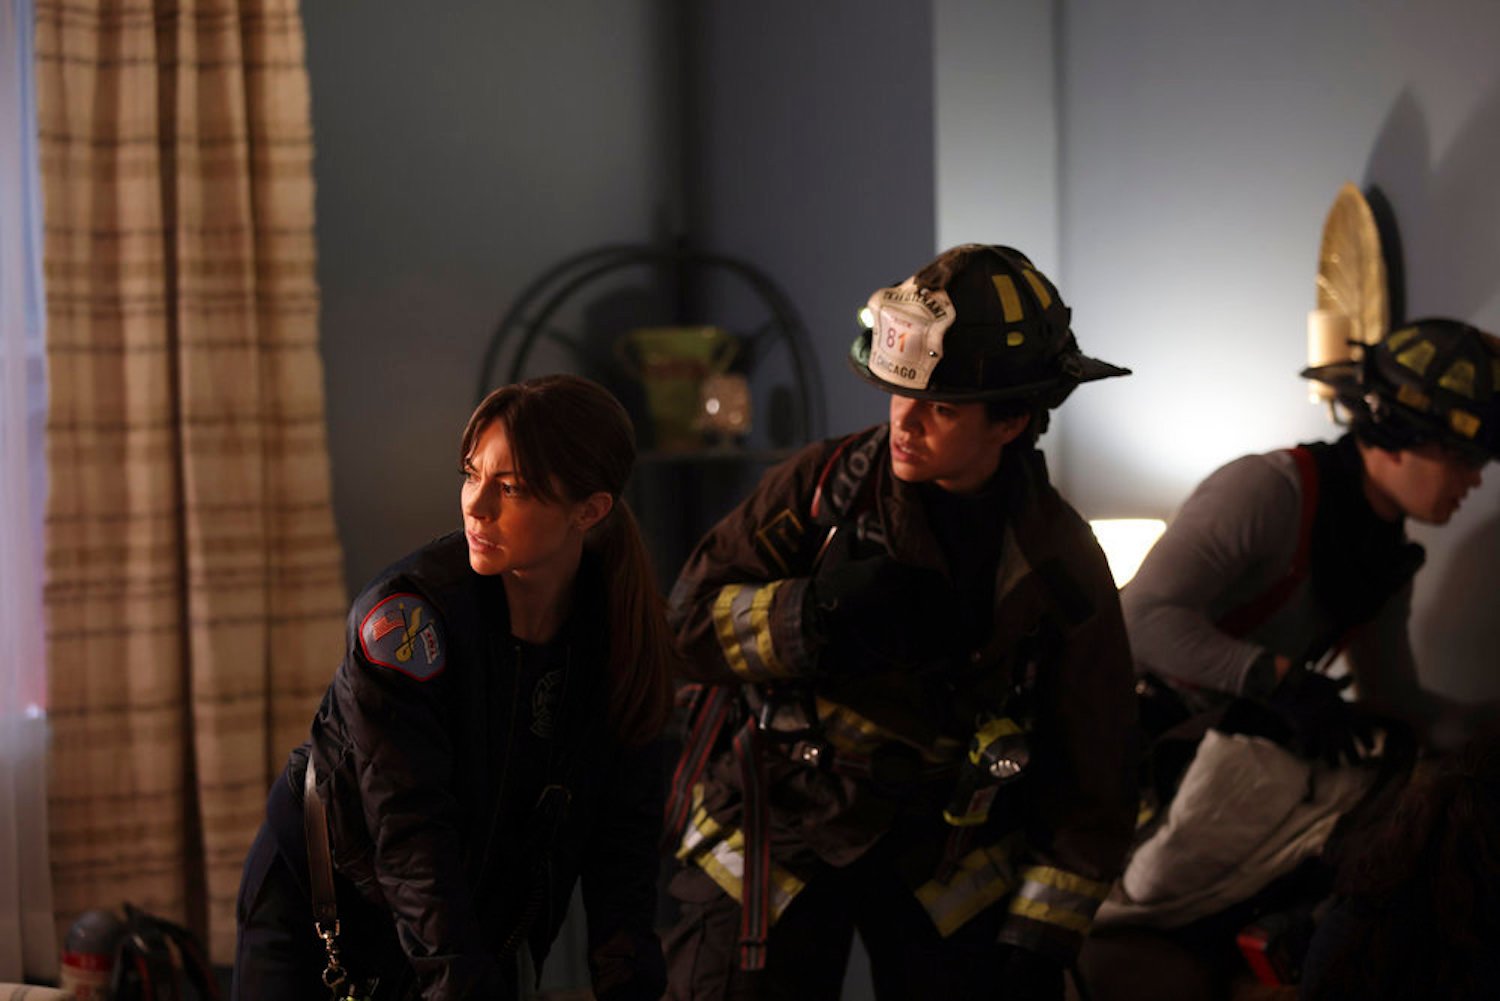 Emma Jacobs and Stella Kidd in a house in 'Chicago Fire'